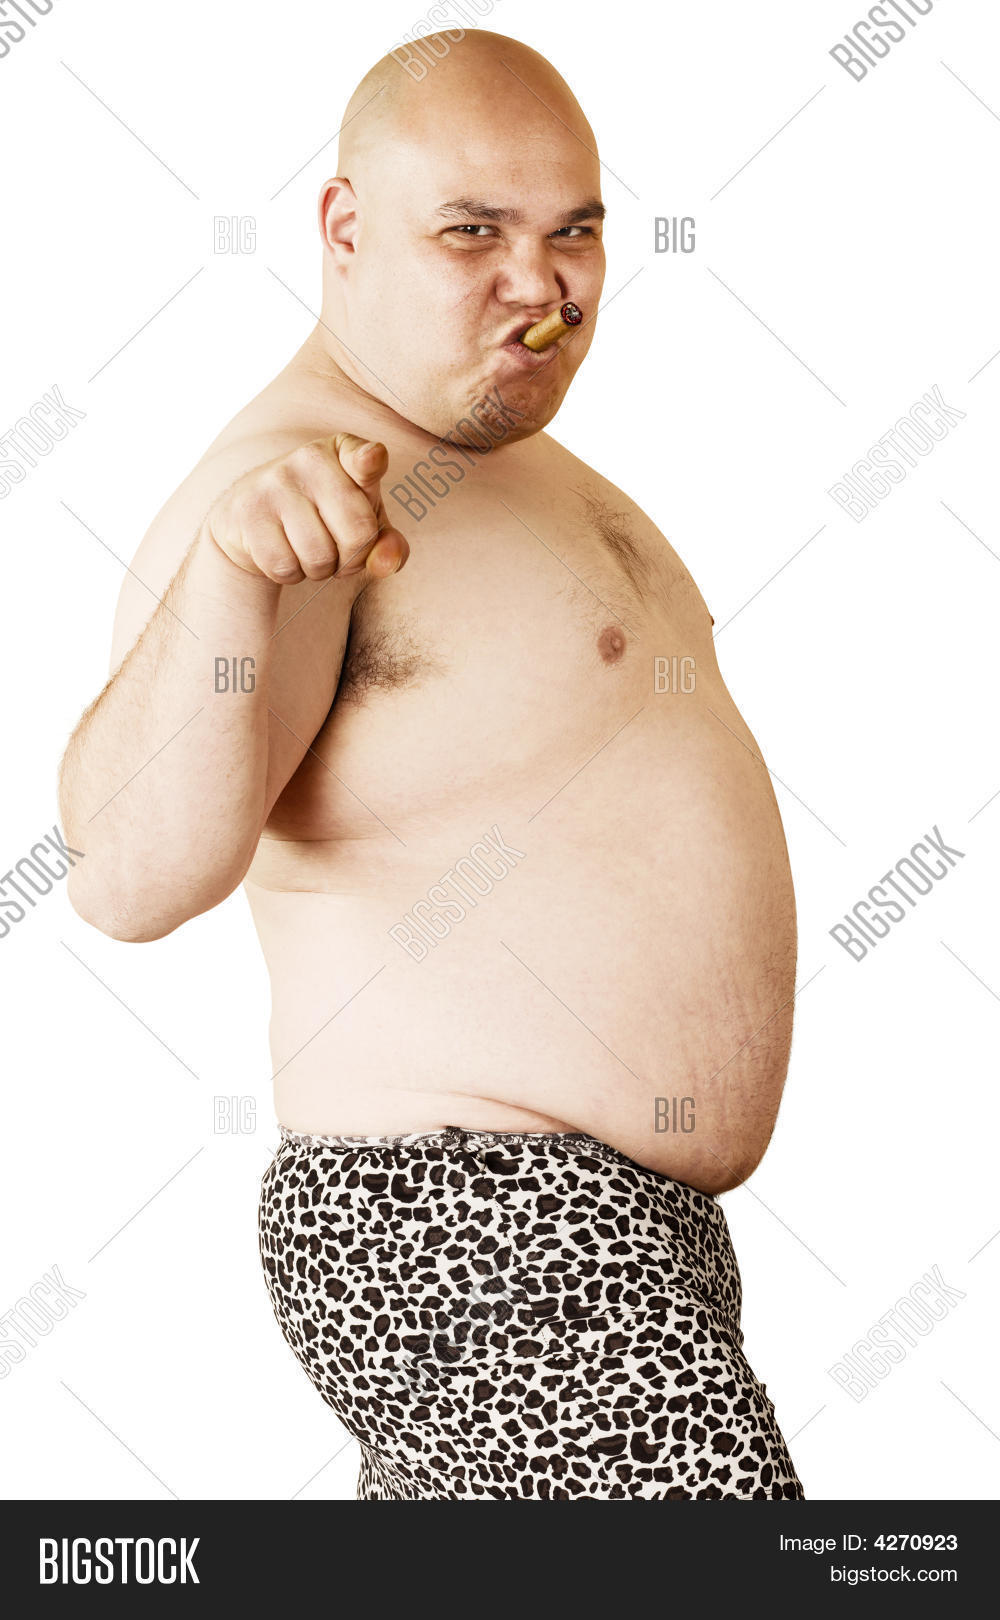 alaa mawaldi recommends fat guy sexy pose pic